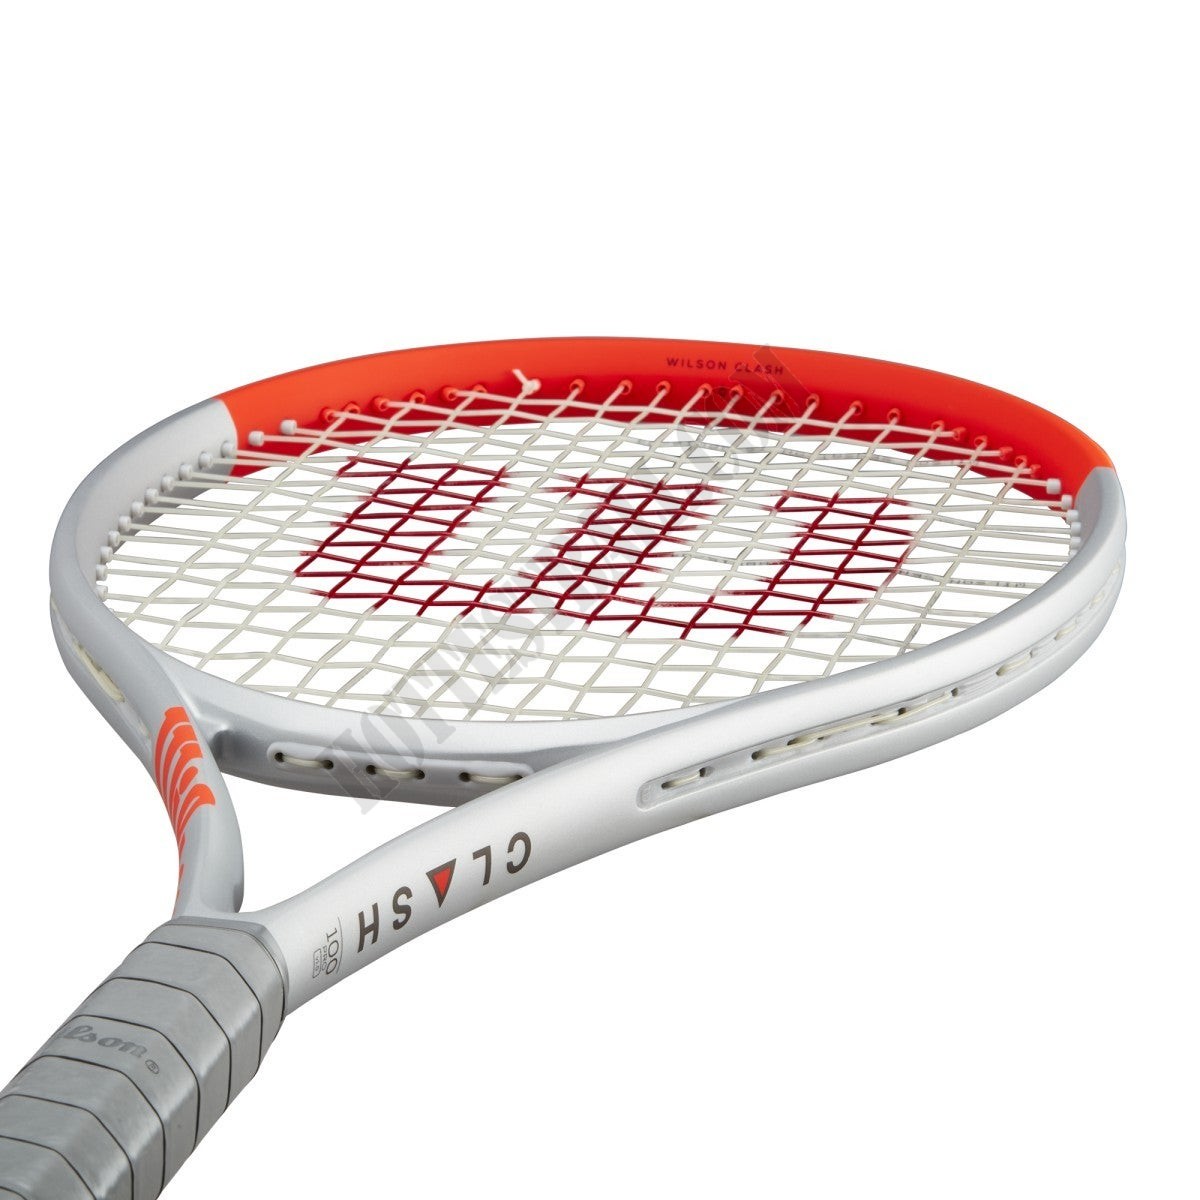 Clash 100 Pro Special Edition Tennis Racket - Wilson Discount Store - -4